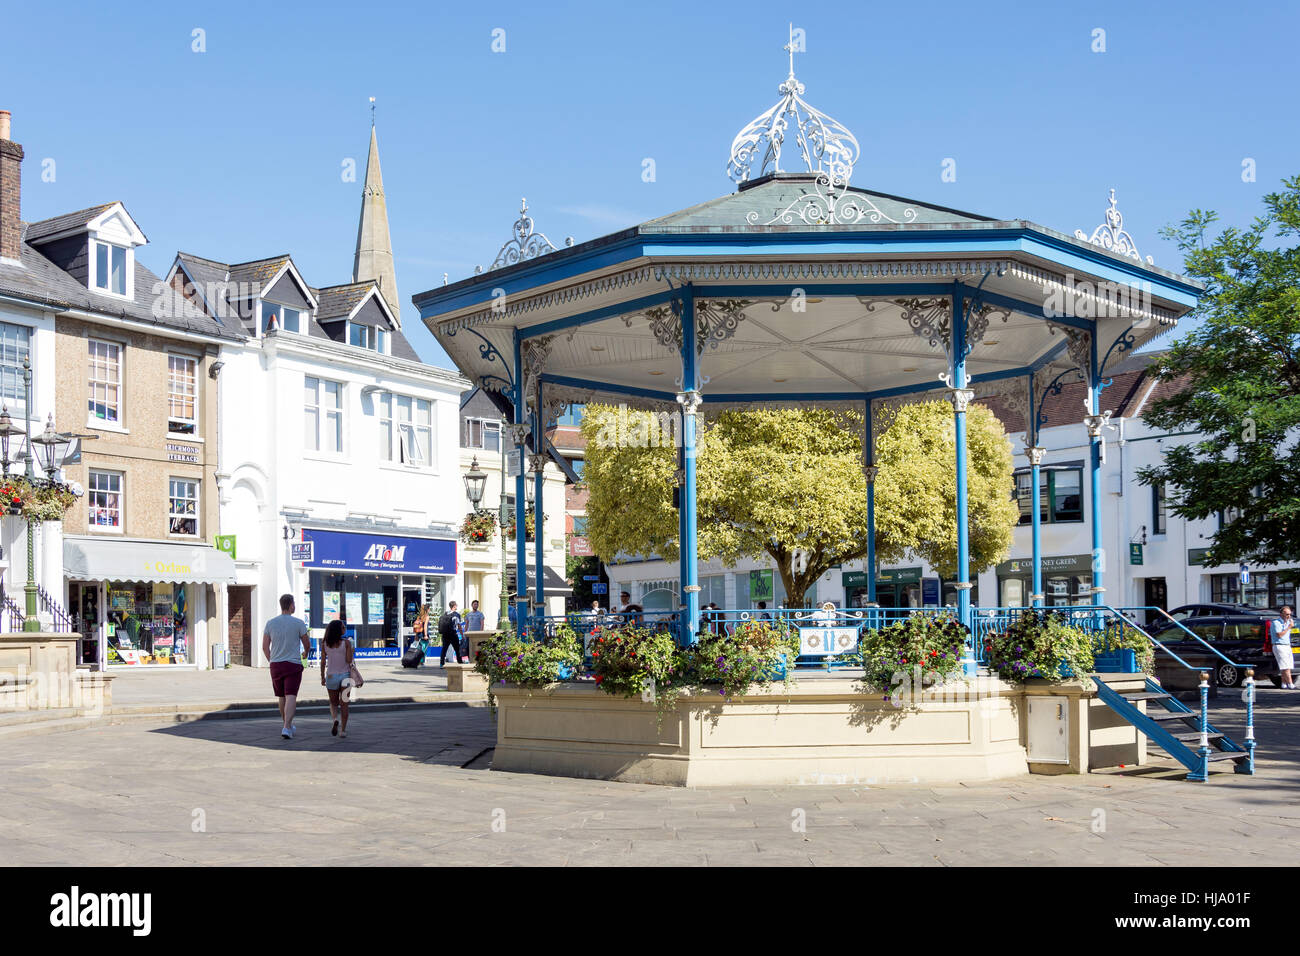 Il Bandstand, CARFAX, Horsham West Sussex, in Inghilterra, Regno Unito Foto Stock